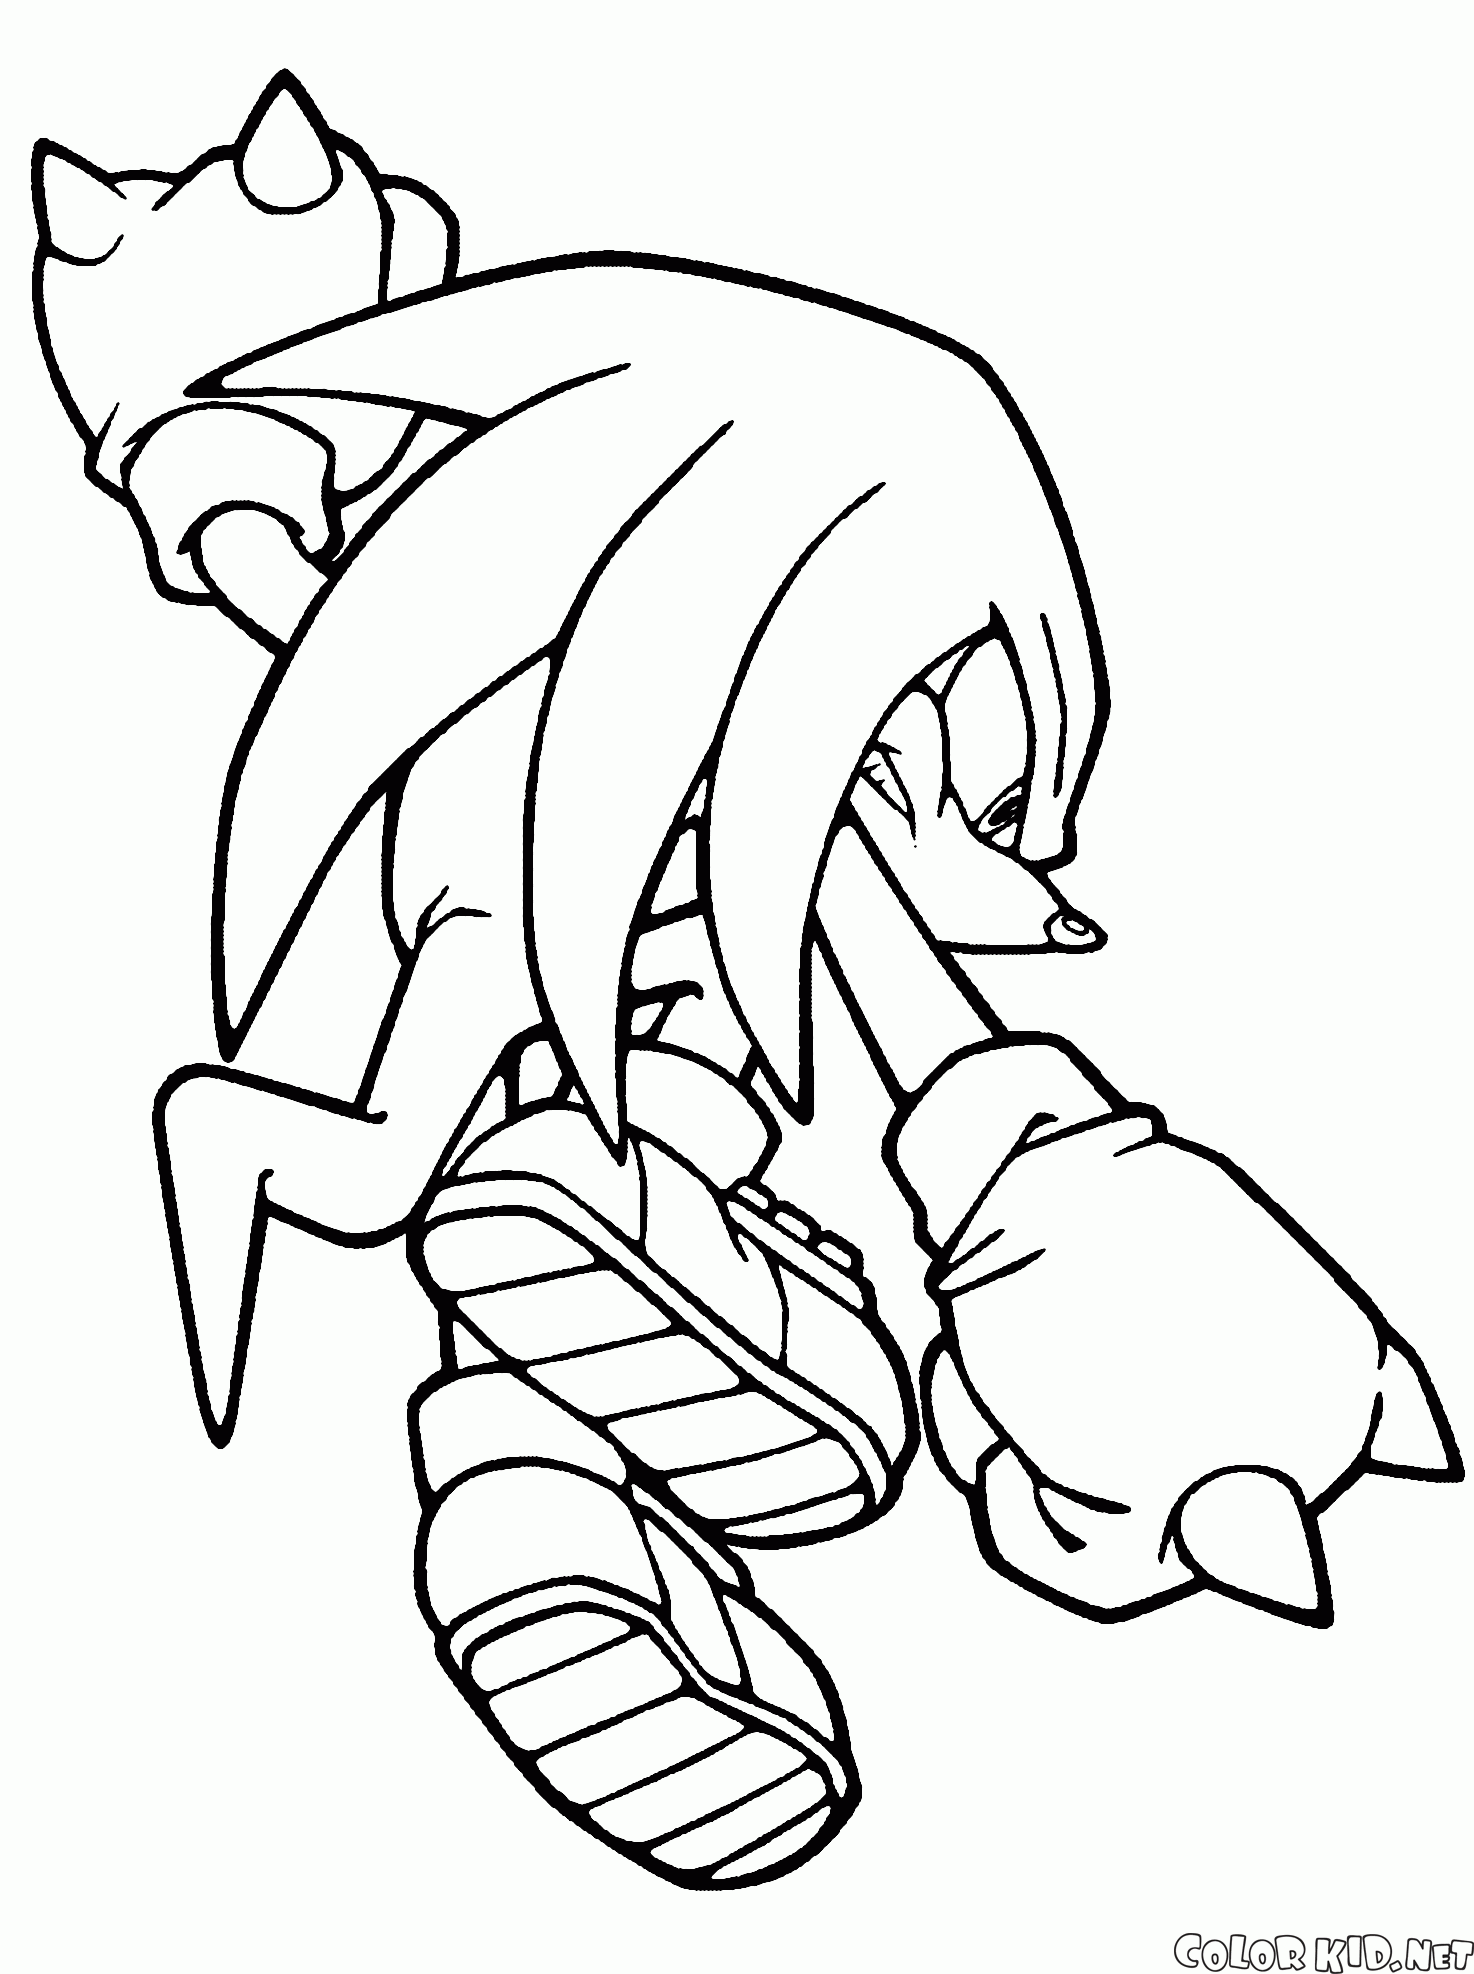 49+ Knuckles Coloring Page Gif